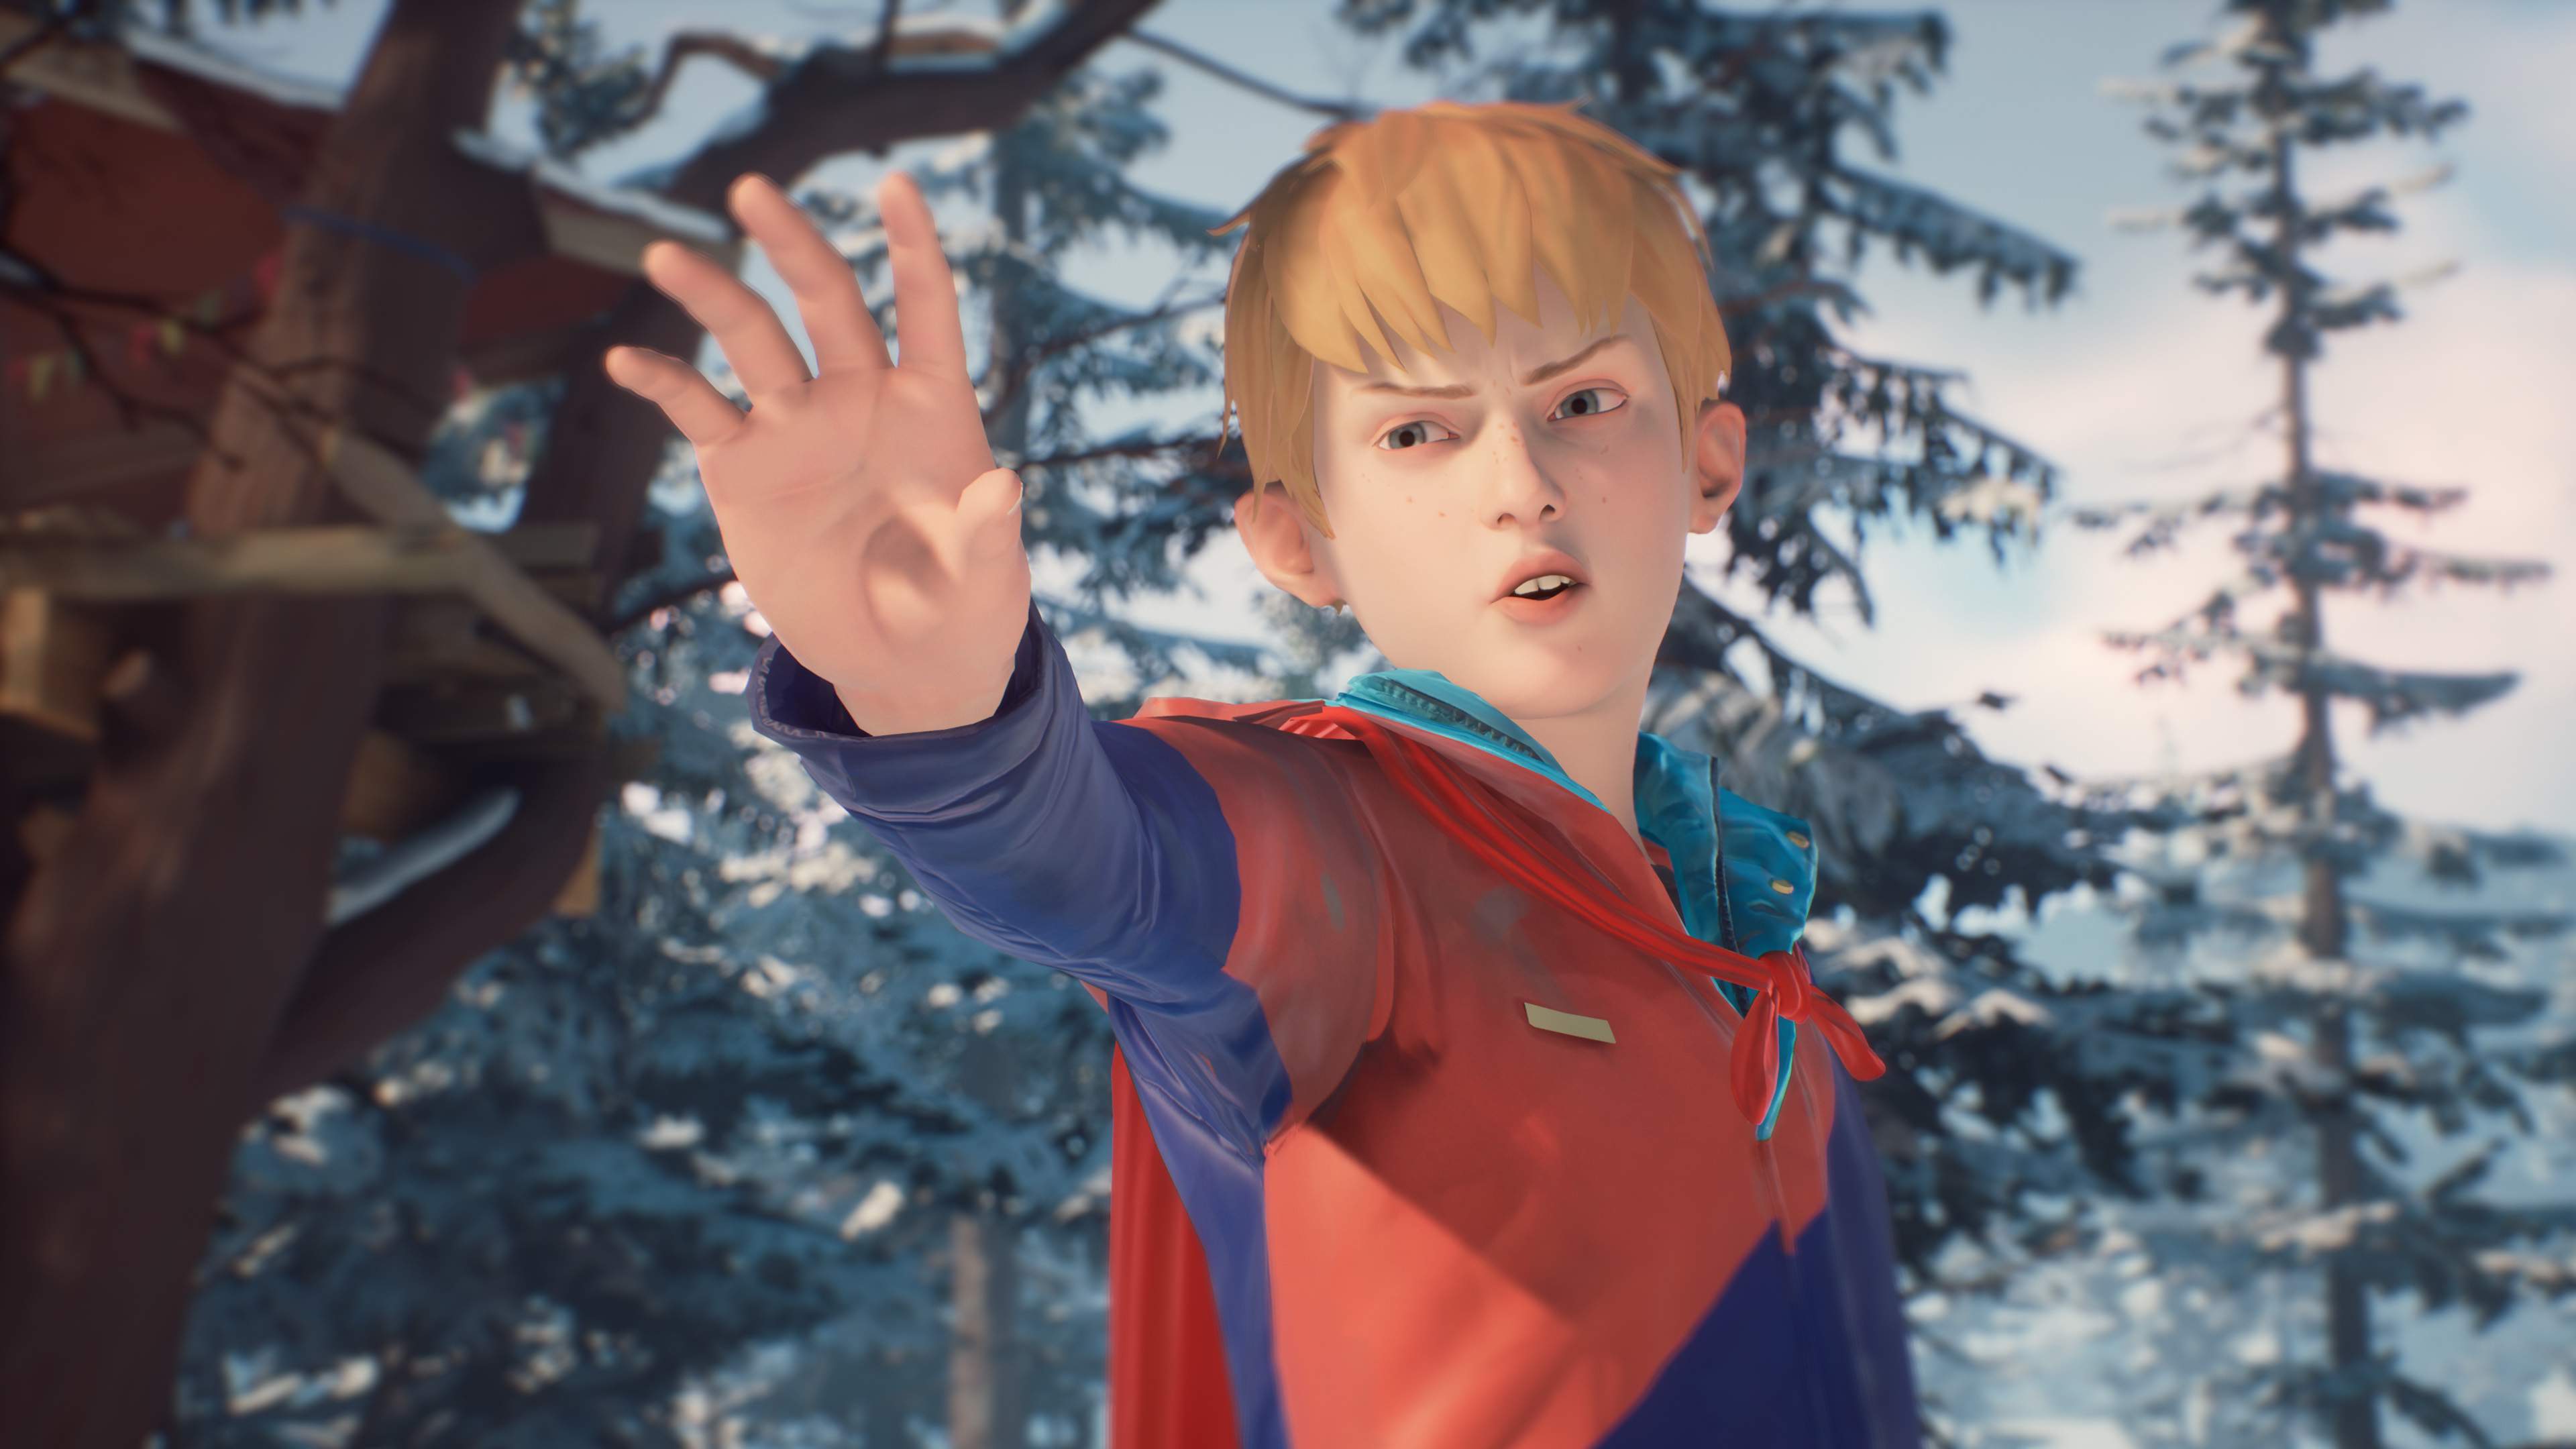 Chris, reaches out his hand in a power pose. He wears a red superhero cape. A snowcapped treehouse is visible behind him.